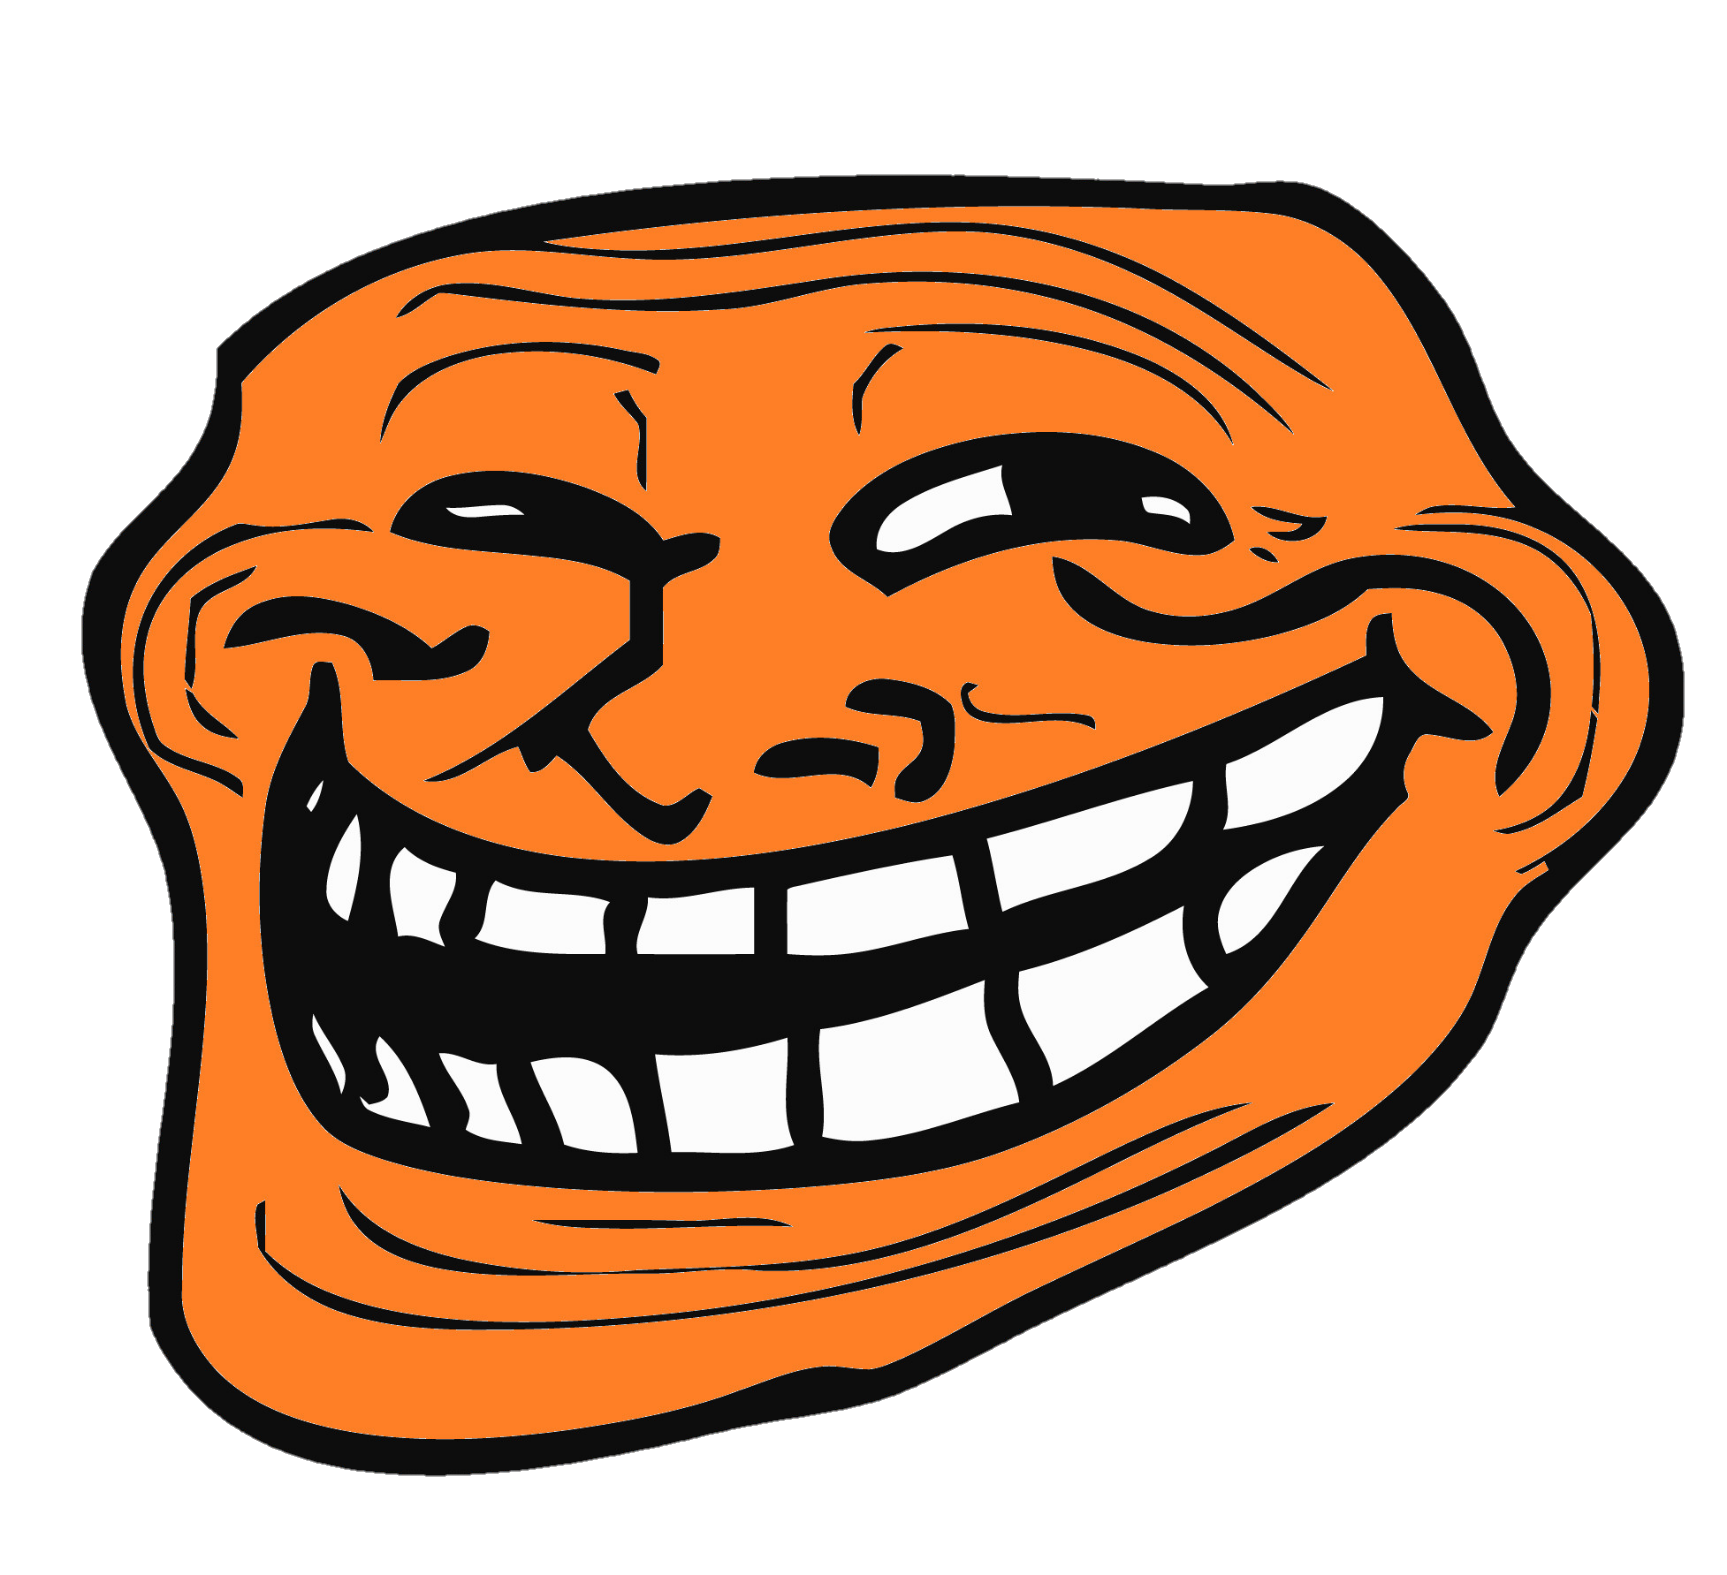 trollface-png-from-pngfre-6